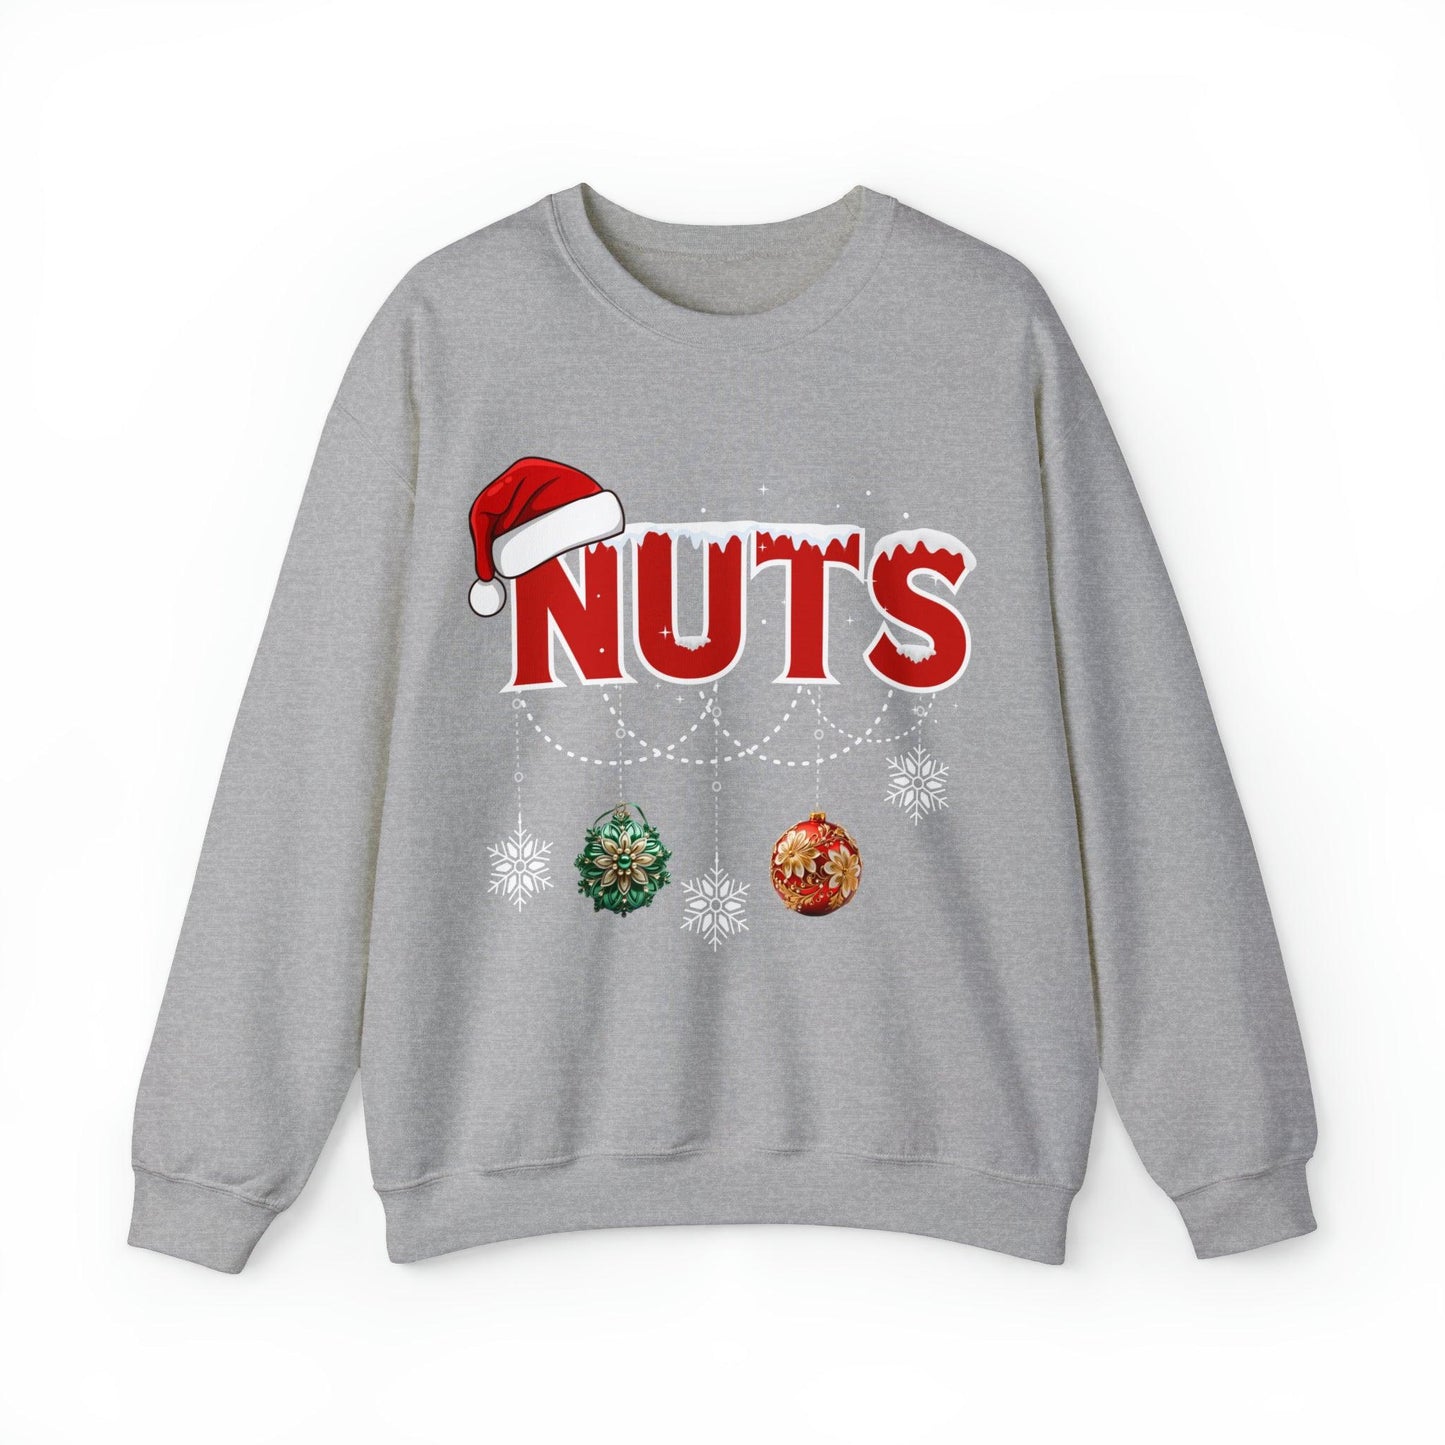 Funny Christmas Matching Shirts Chest Nuts Couples Matching Shirts Holiday Shirt Cute Christmas Shirt Couple Sweater, Family Tee - Giftsmojo